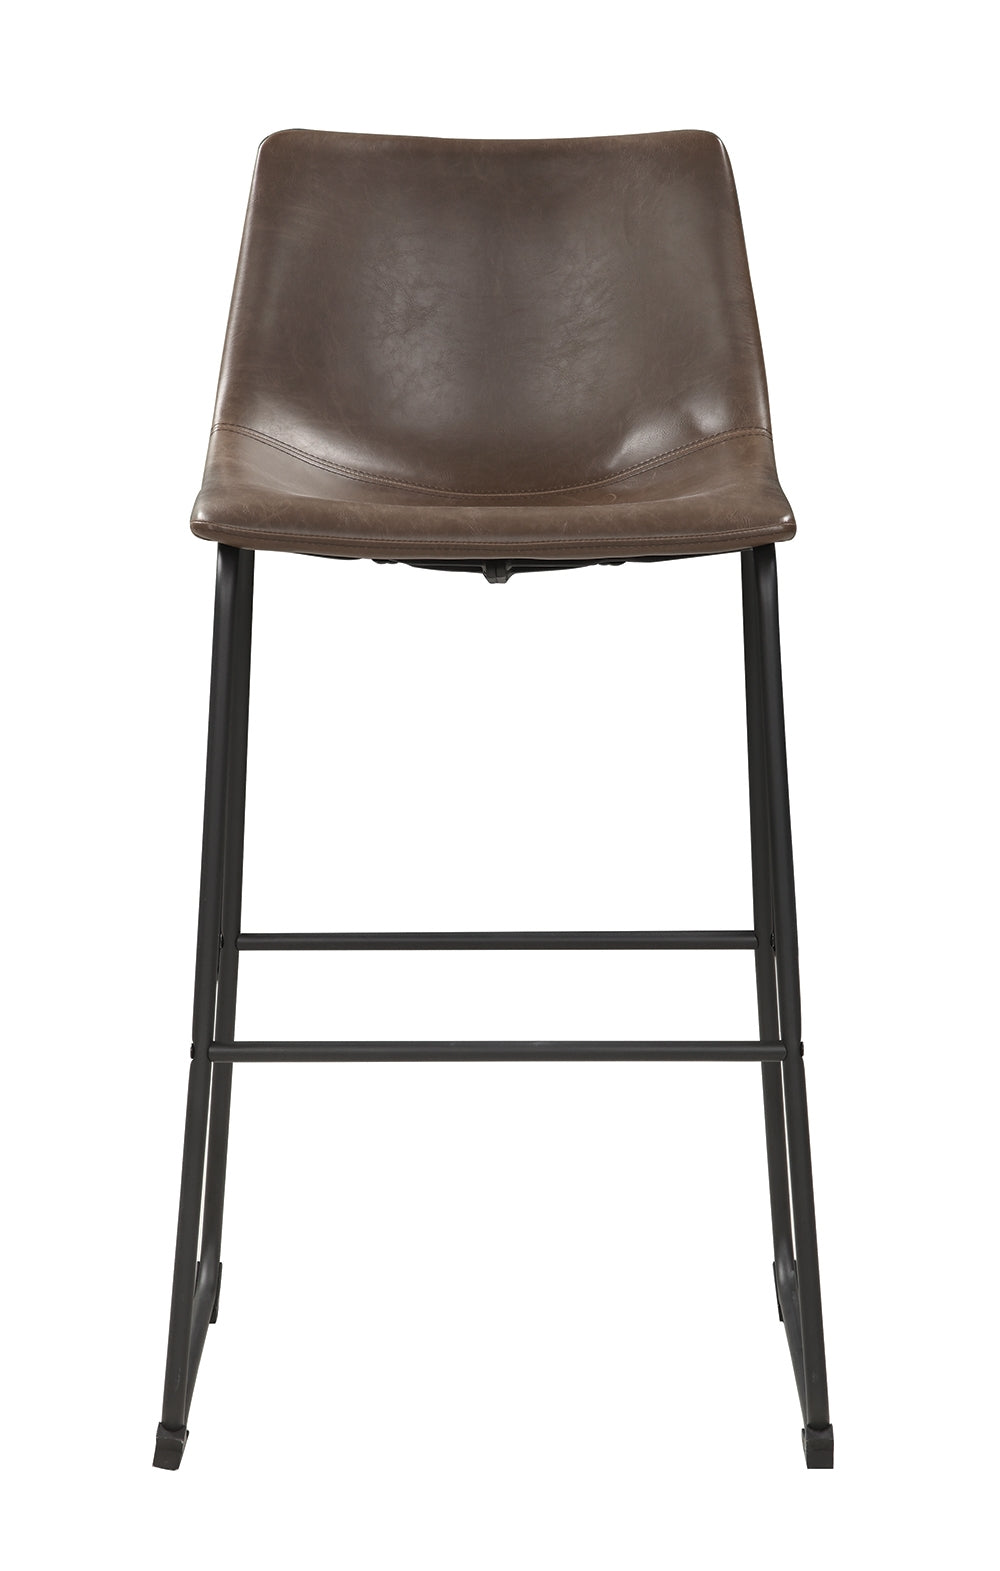 Armless Bar Stools Two-Tone Brown And Black Set Of 2